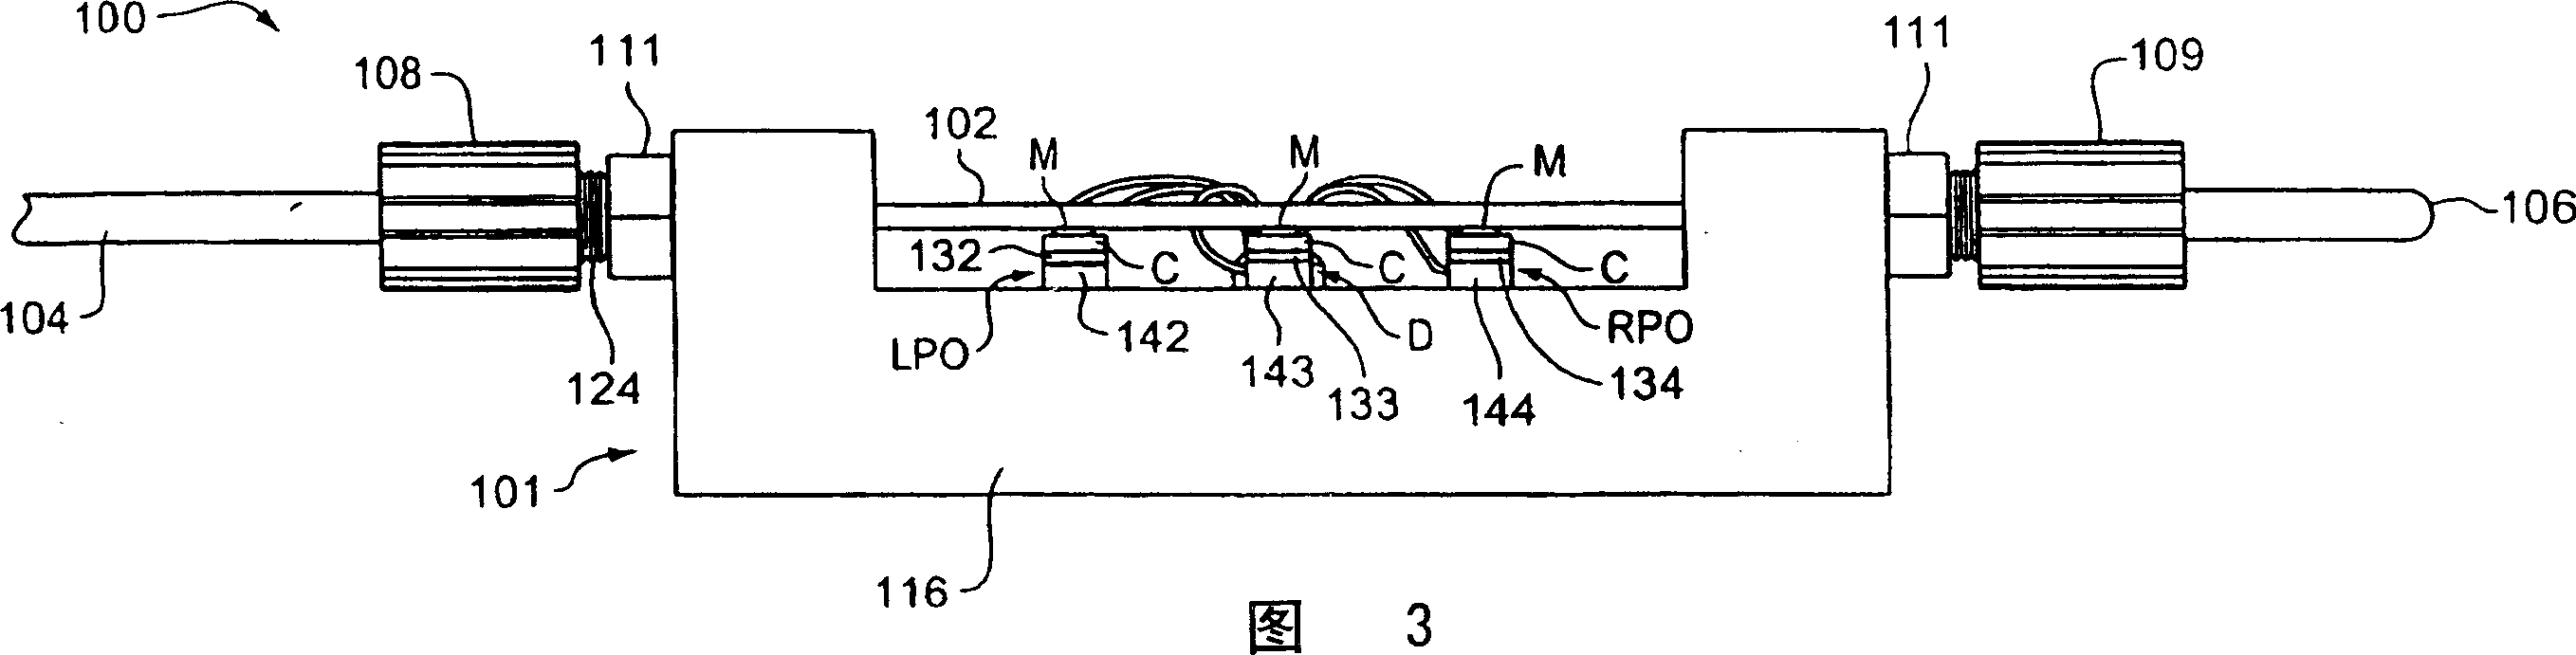 Manufacturing flow meters having a flow tube made of a fluoropolymer substance